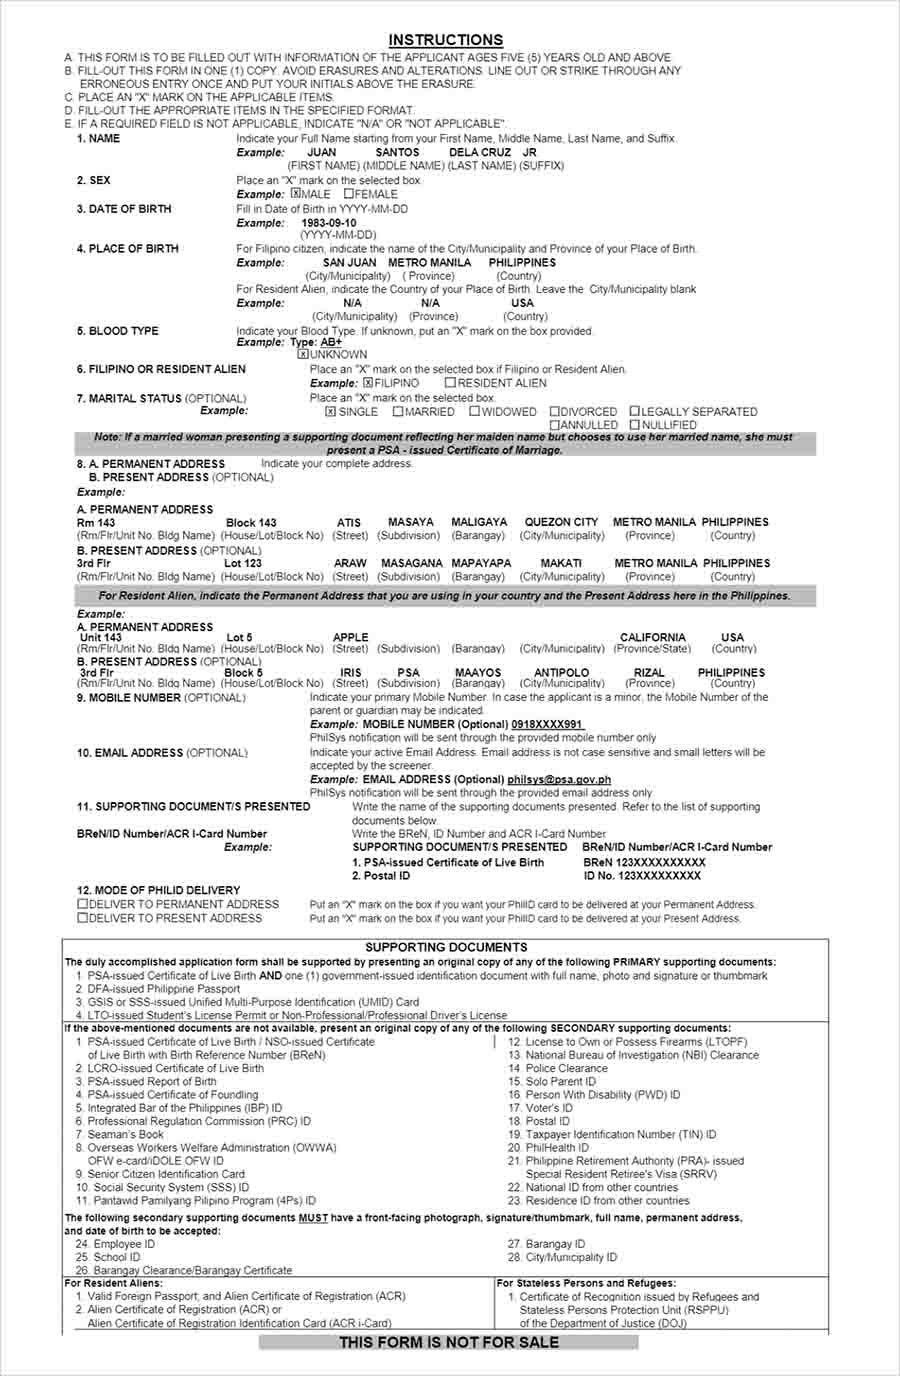 PhilSys Application Form (1)